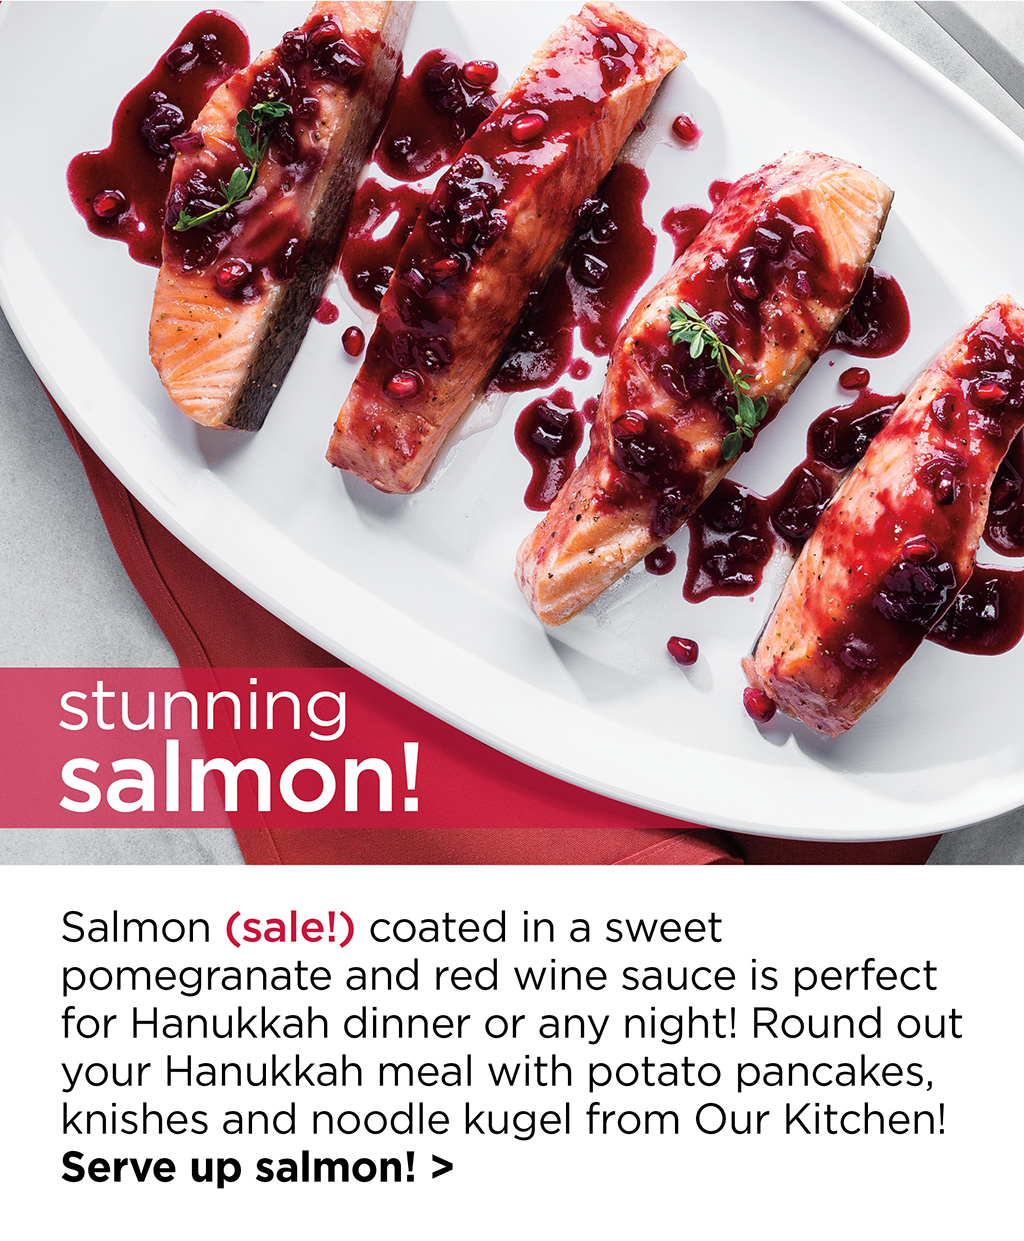 stunning salmon! Salmon (sale!) coated in a sweet pomegranate and red wine sauce is perfect for Hanukkah dinner or any night! Round out your Hanukkah meal with potato pancakes, knishes and noodle kugel from Our Kitchen! Serve up salmon! >